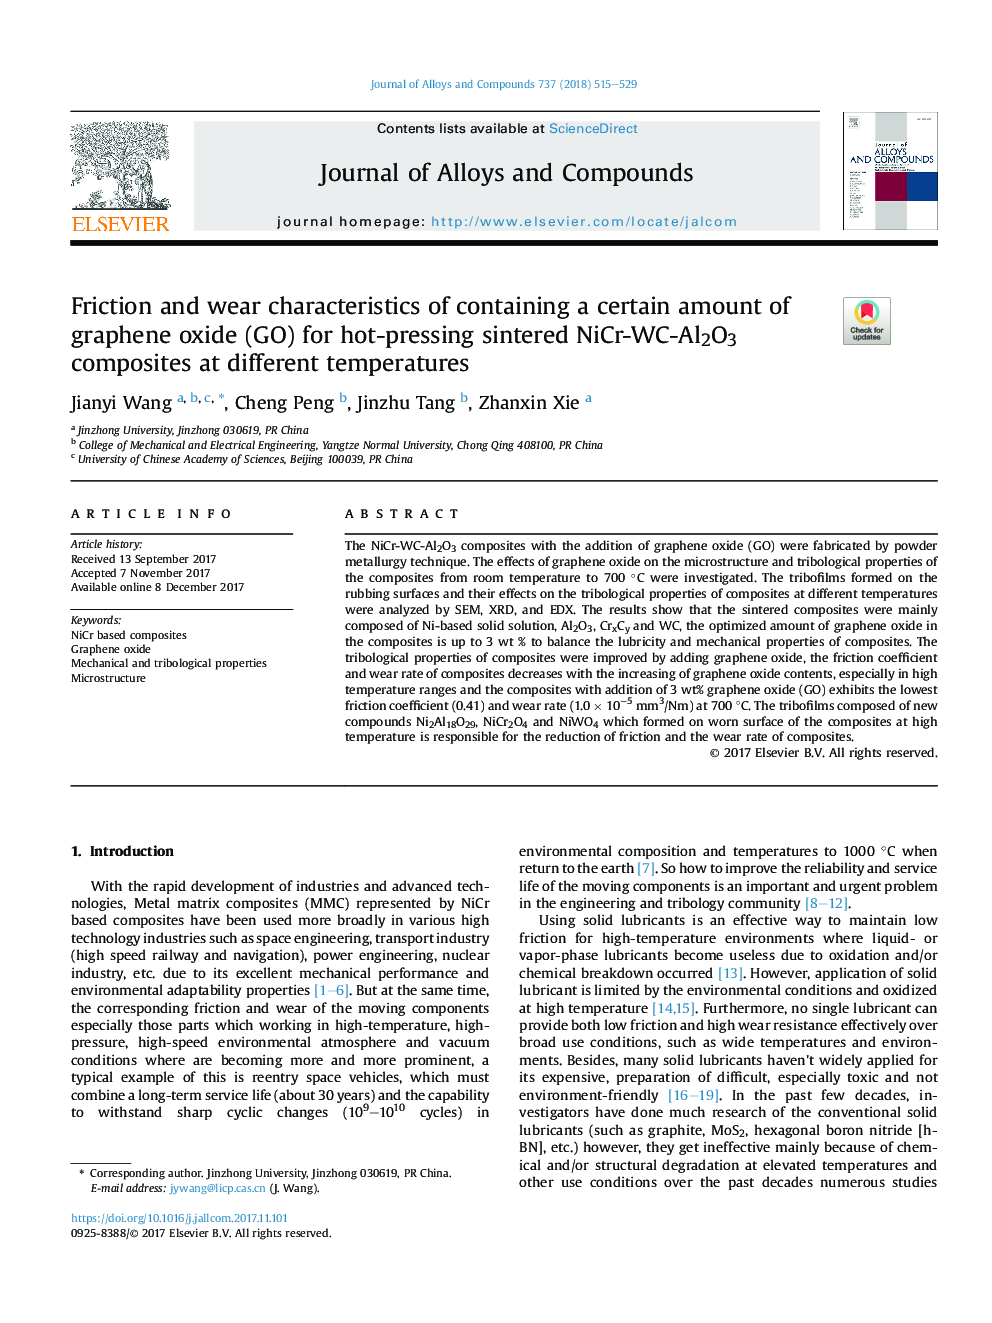 Friction and wear characteristics of containing a certain amount of graphene oxide (GO) for hot-pressing sintered NiCr-WC-Al2O3 composites at different temperatures